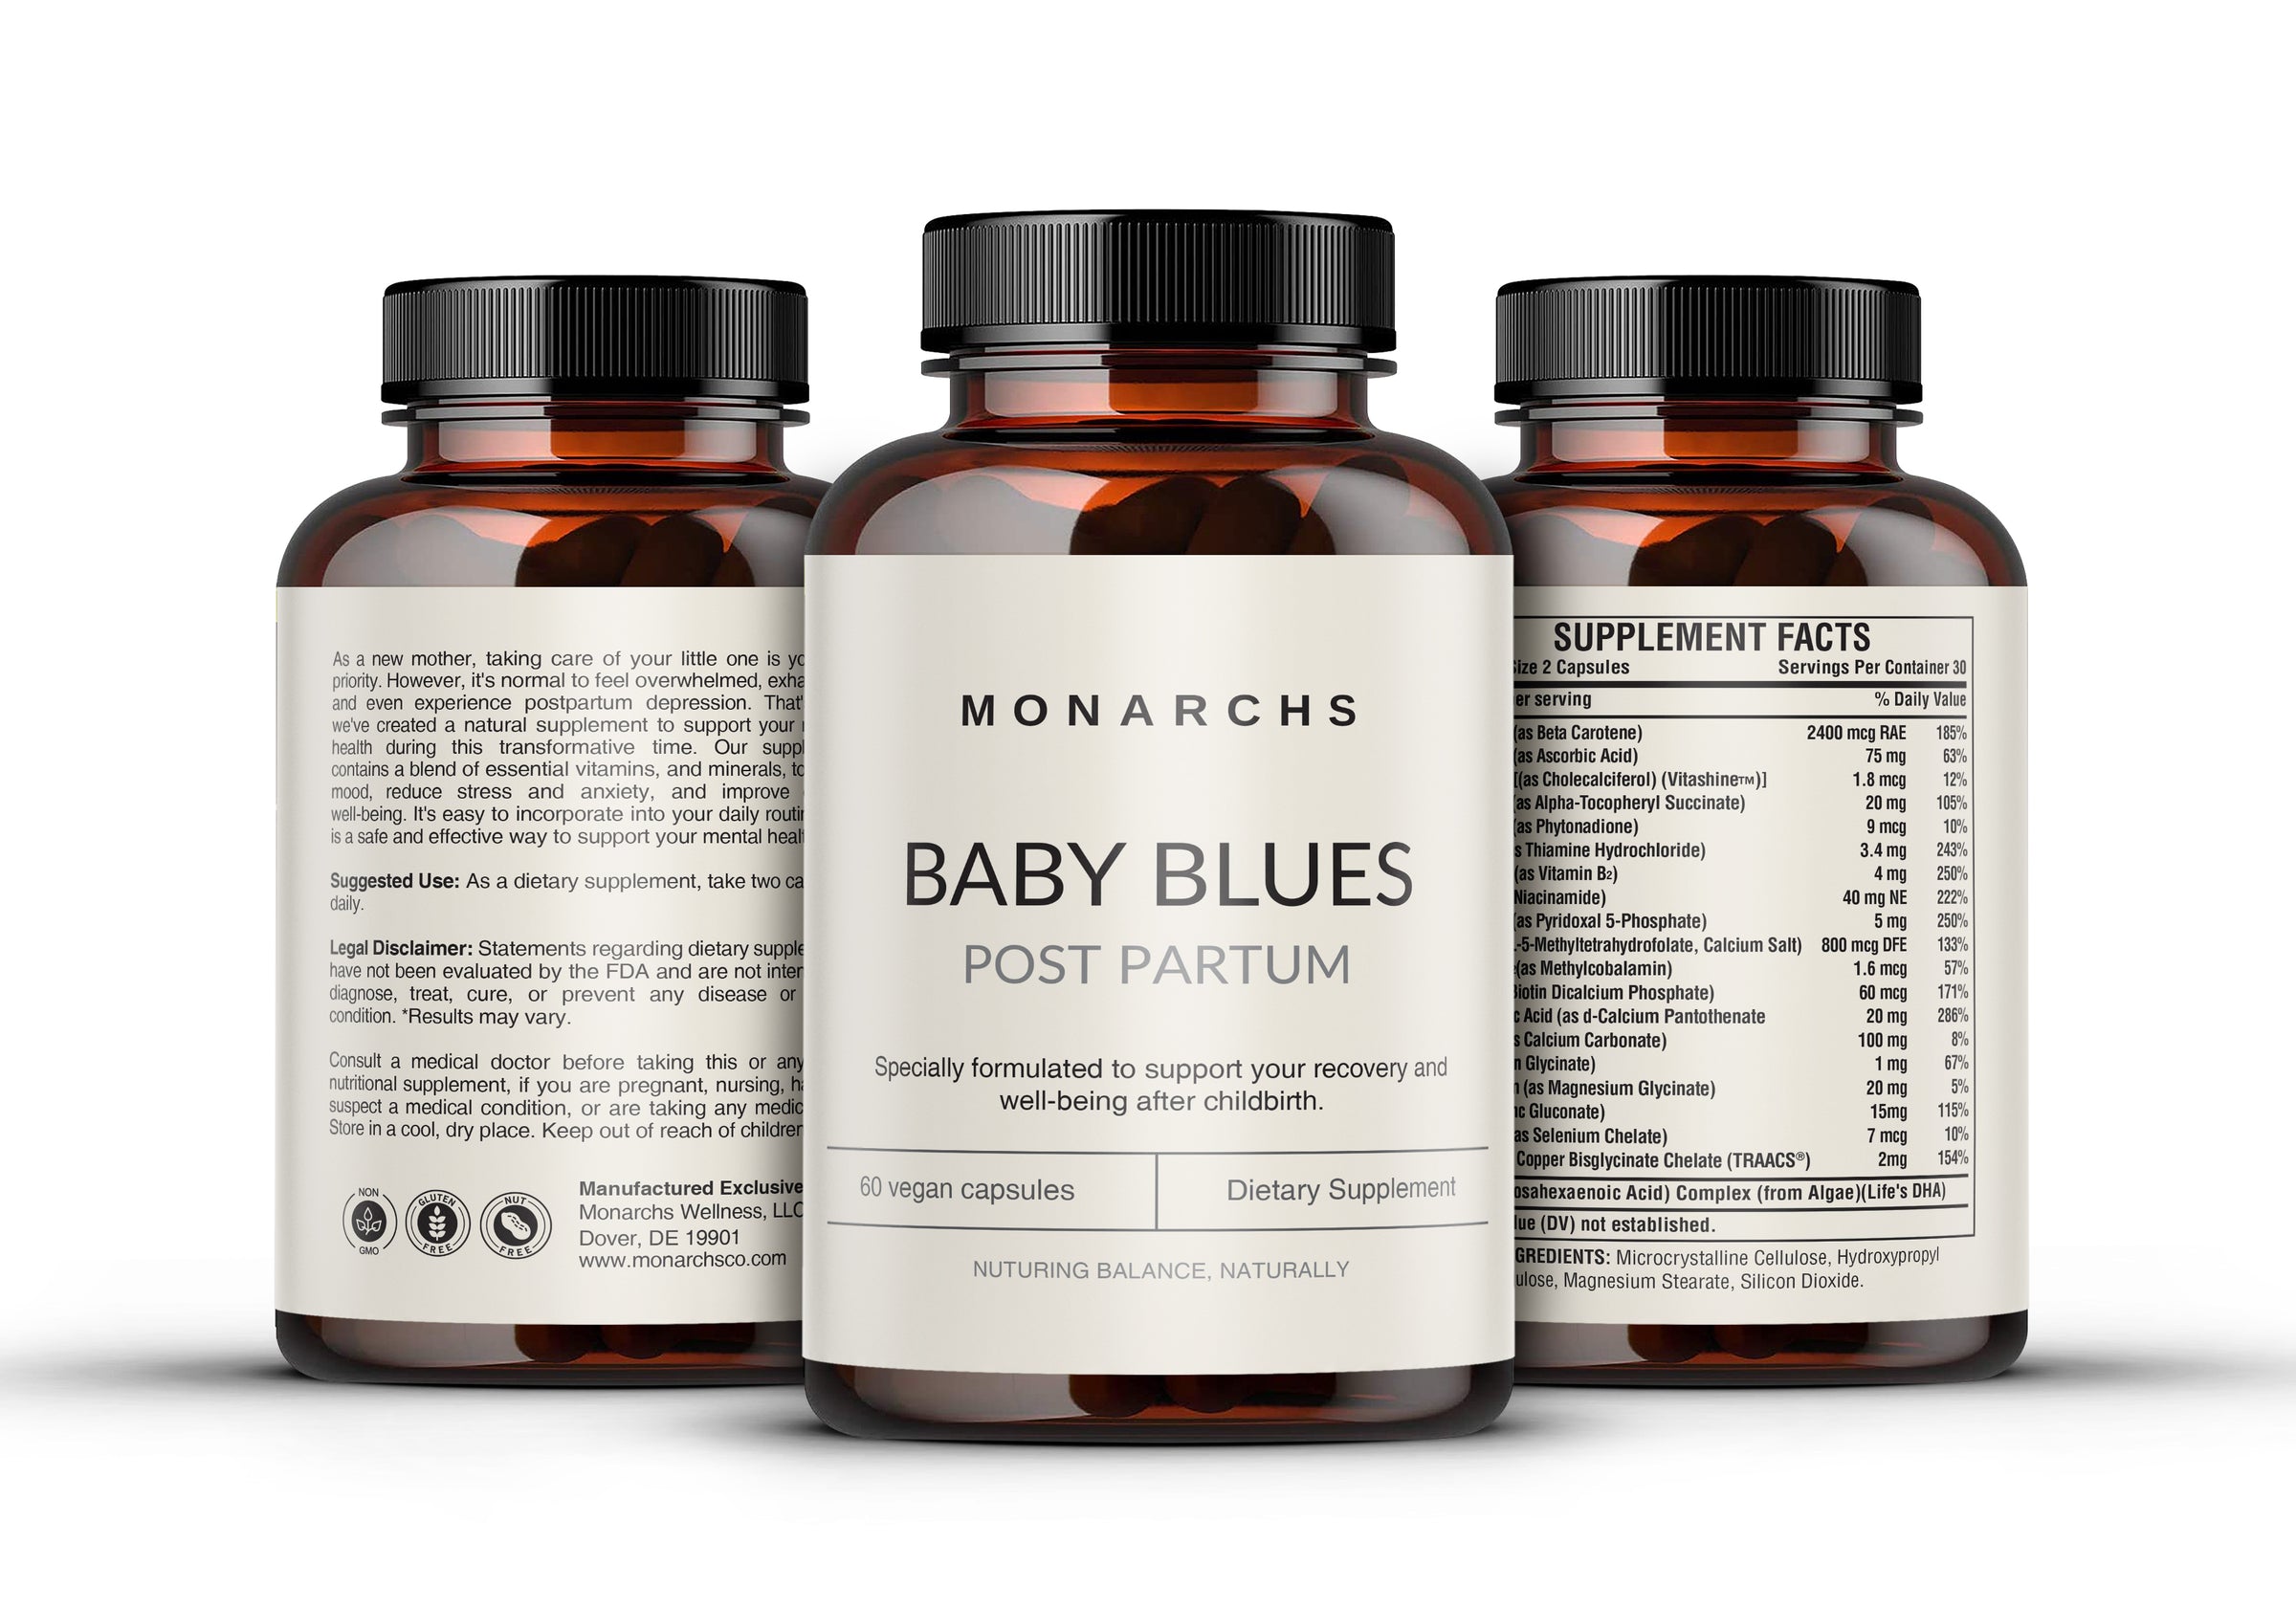 5 Best Postpartum Supplements Every Mom Should Know – Baby Blues